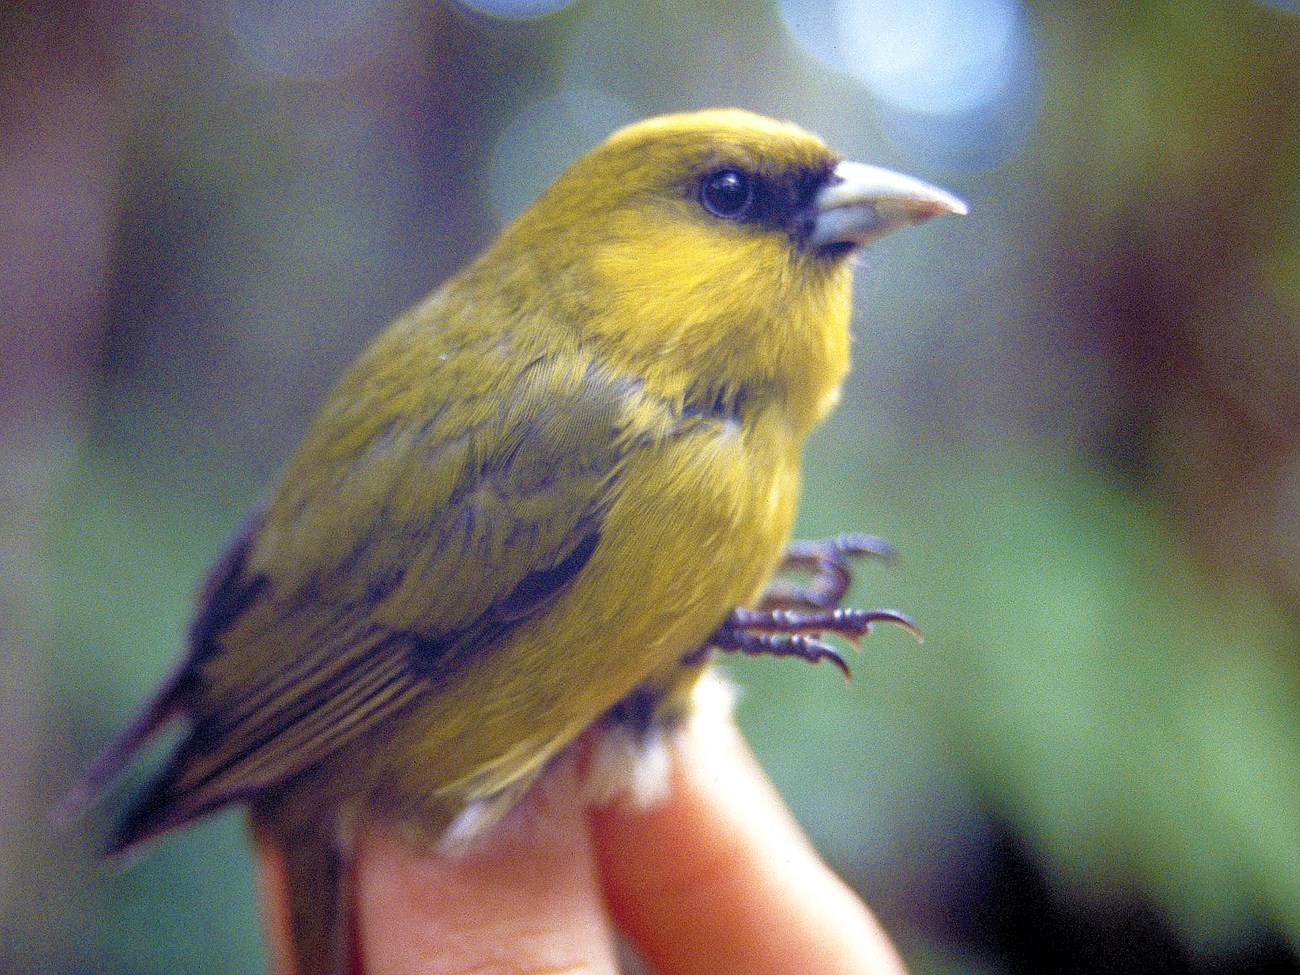 Human fingers holding a bright yellow bird with black markings